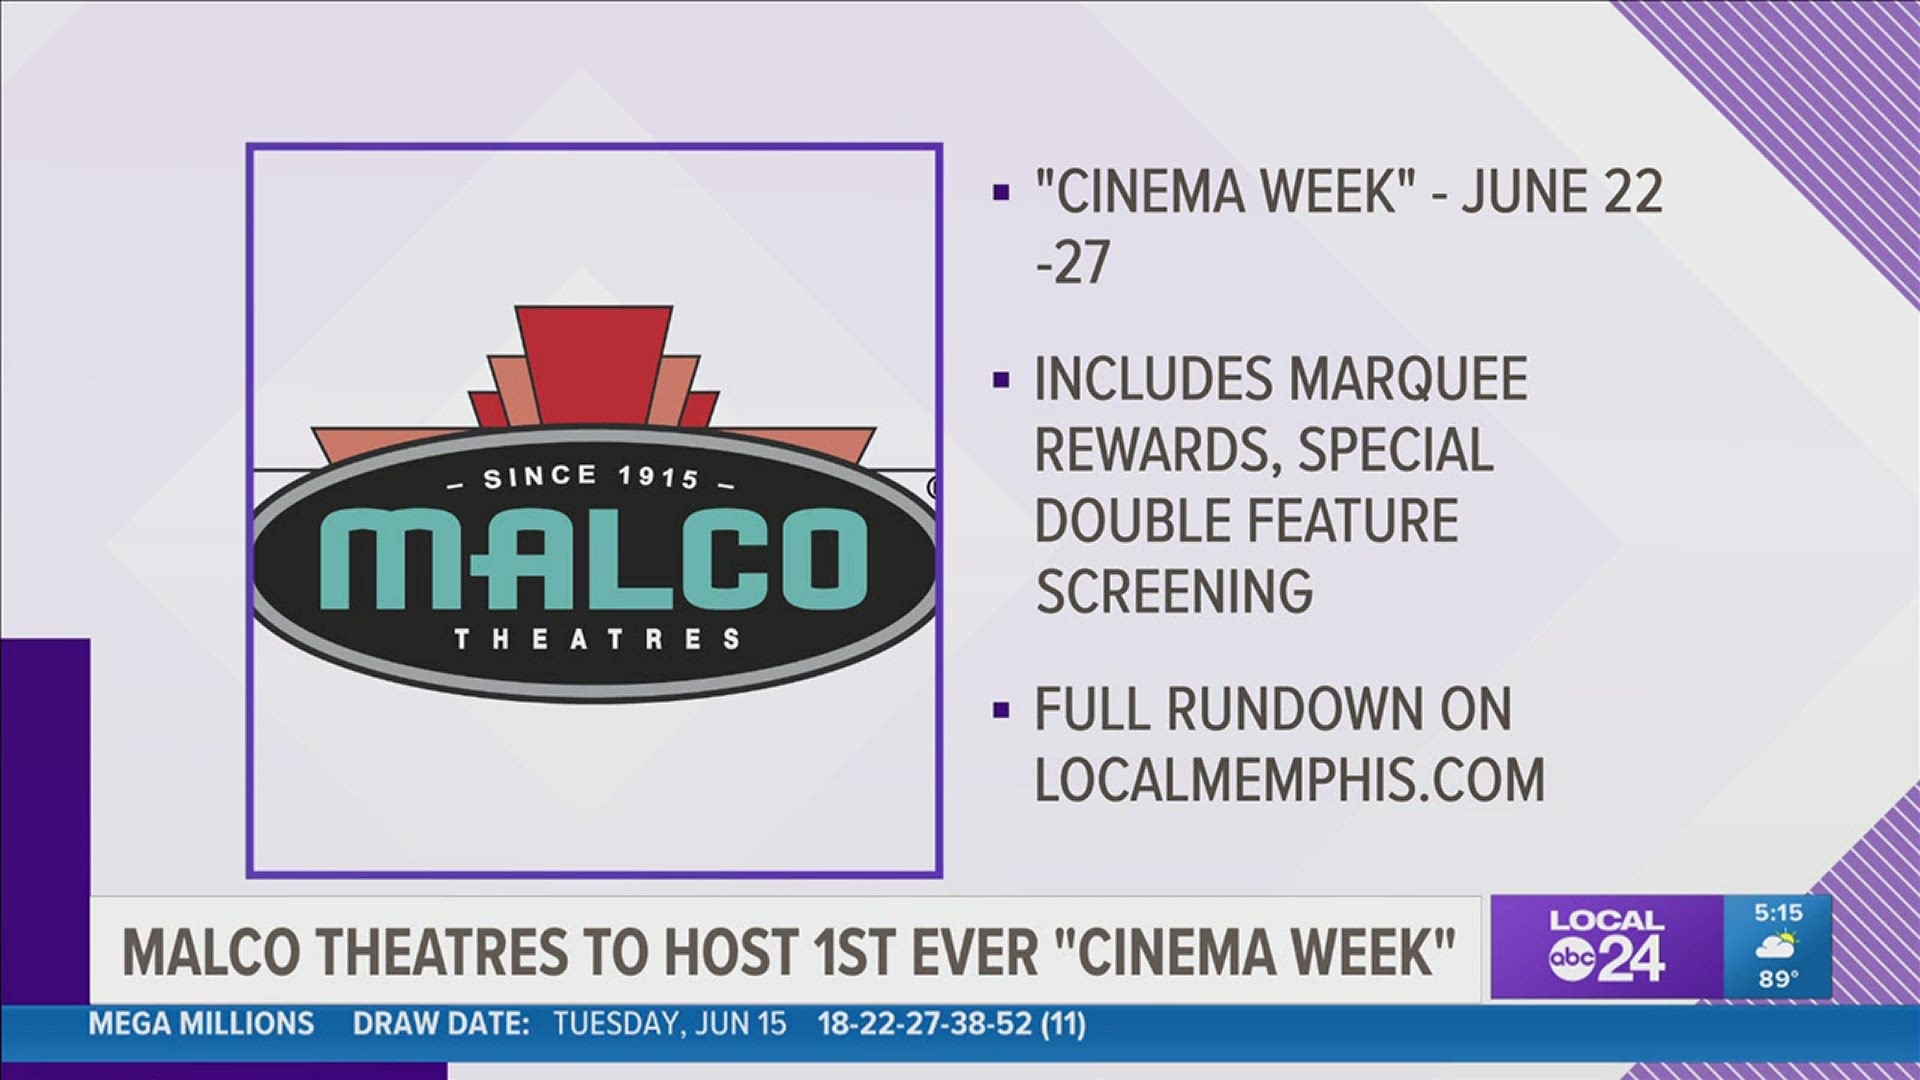 There are marquee rewards, special double feature screenings, and an advance viewing of "Fast and Furious 9."